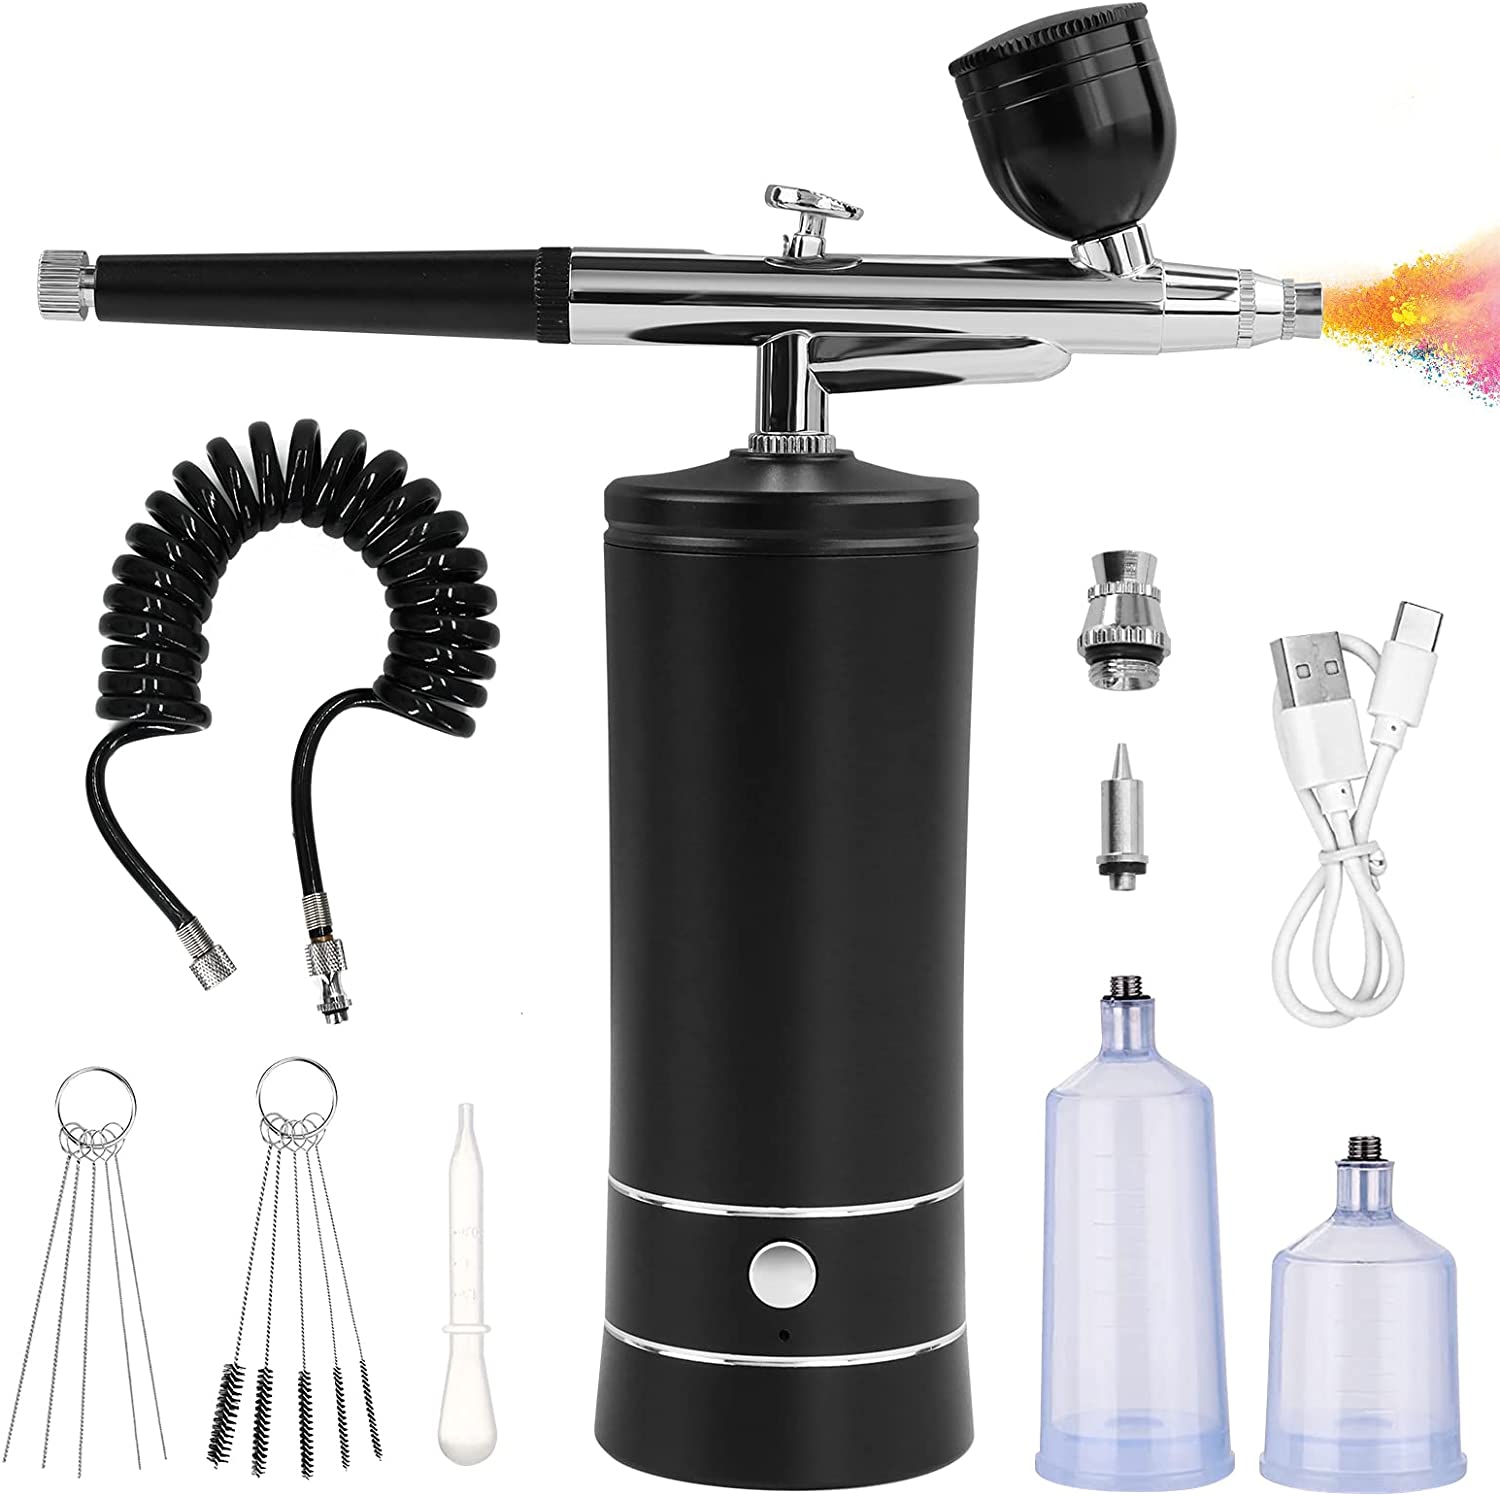 Airbrush Kit with Compressor 30psi Air Brush Gun Rechargeable Portable Handheld Cordless Airbrush for Nail Art, Painting, Cake Decor, Cookie, Mode, M